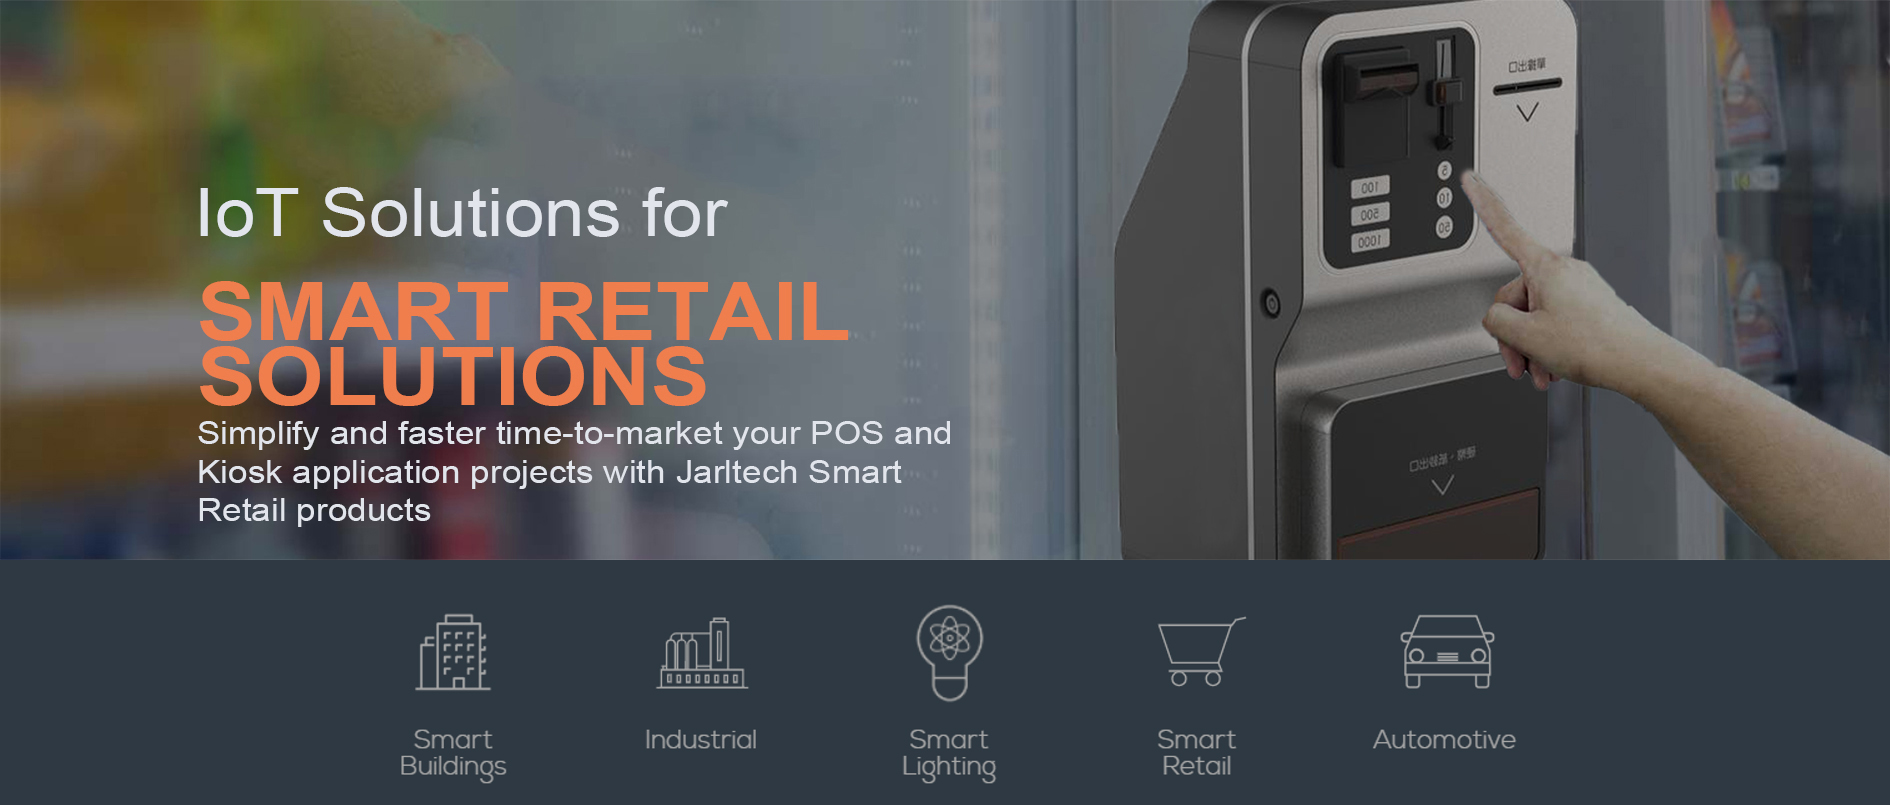 Optimize and accelerate the time-to-market for your POS and Kiosk application projects using Jarltech Smart Retail Solutions